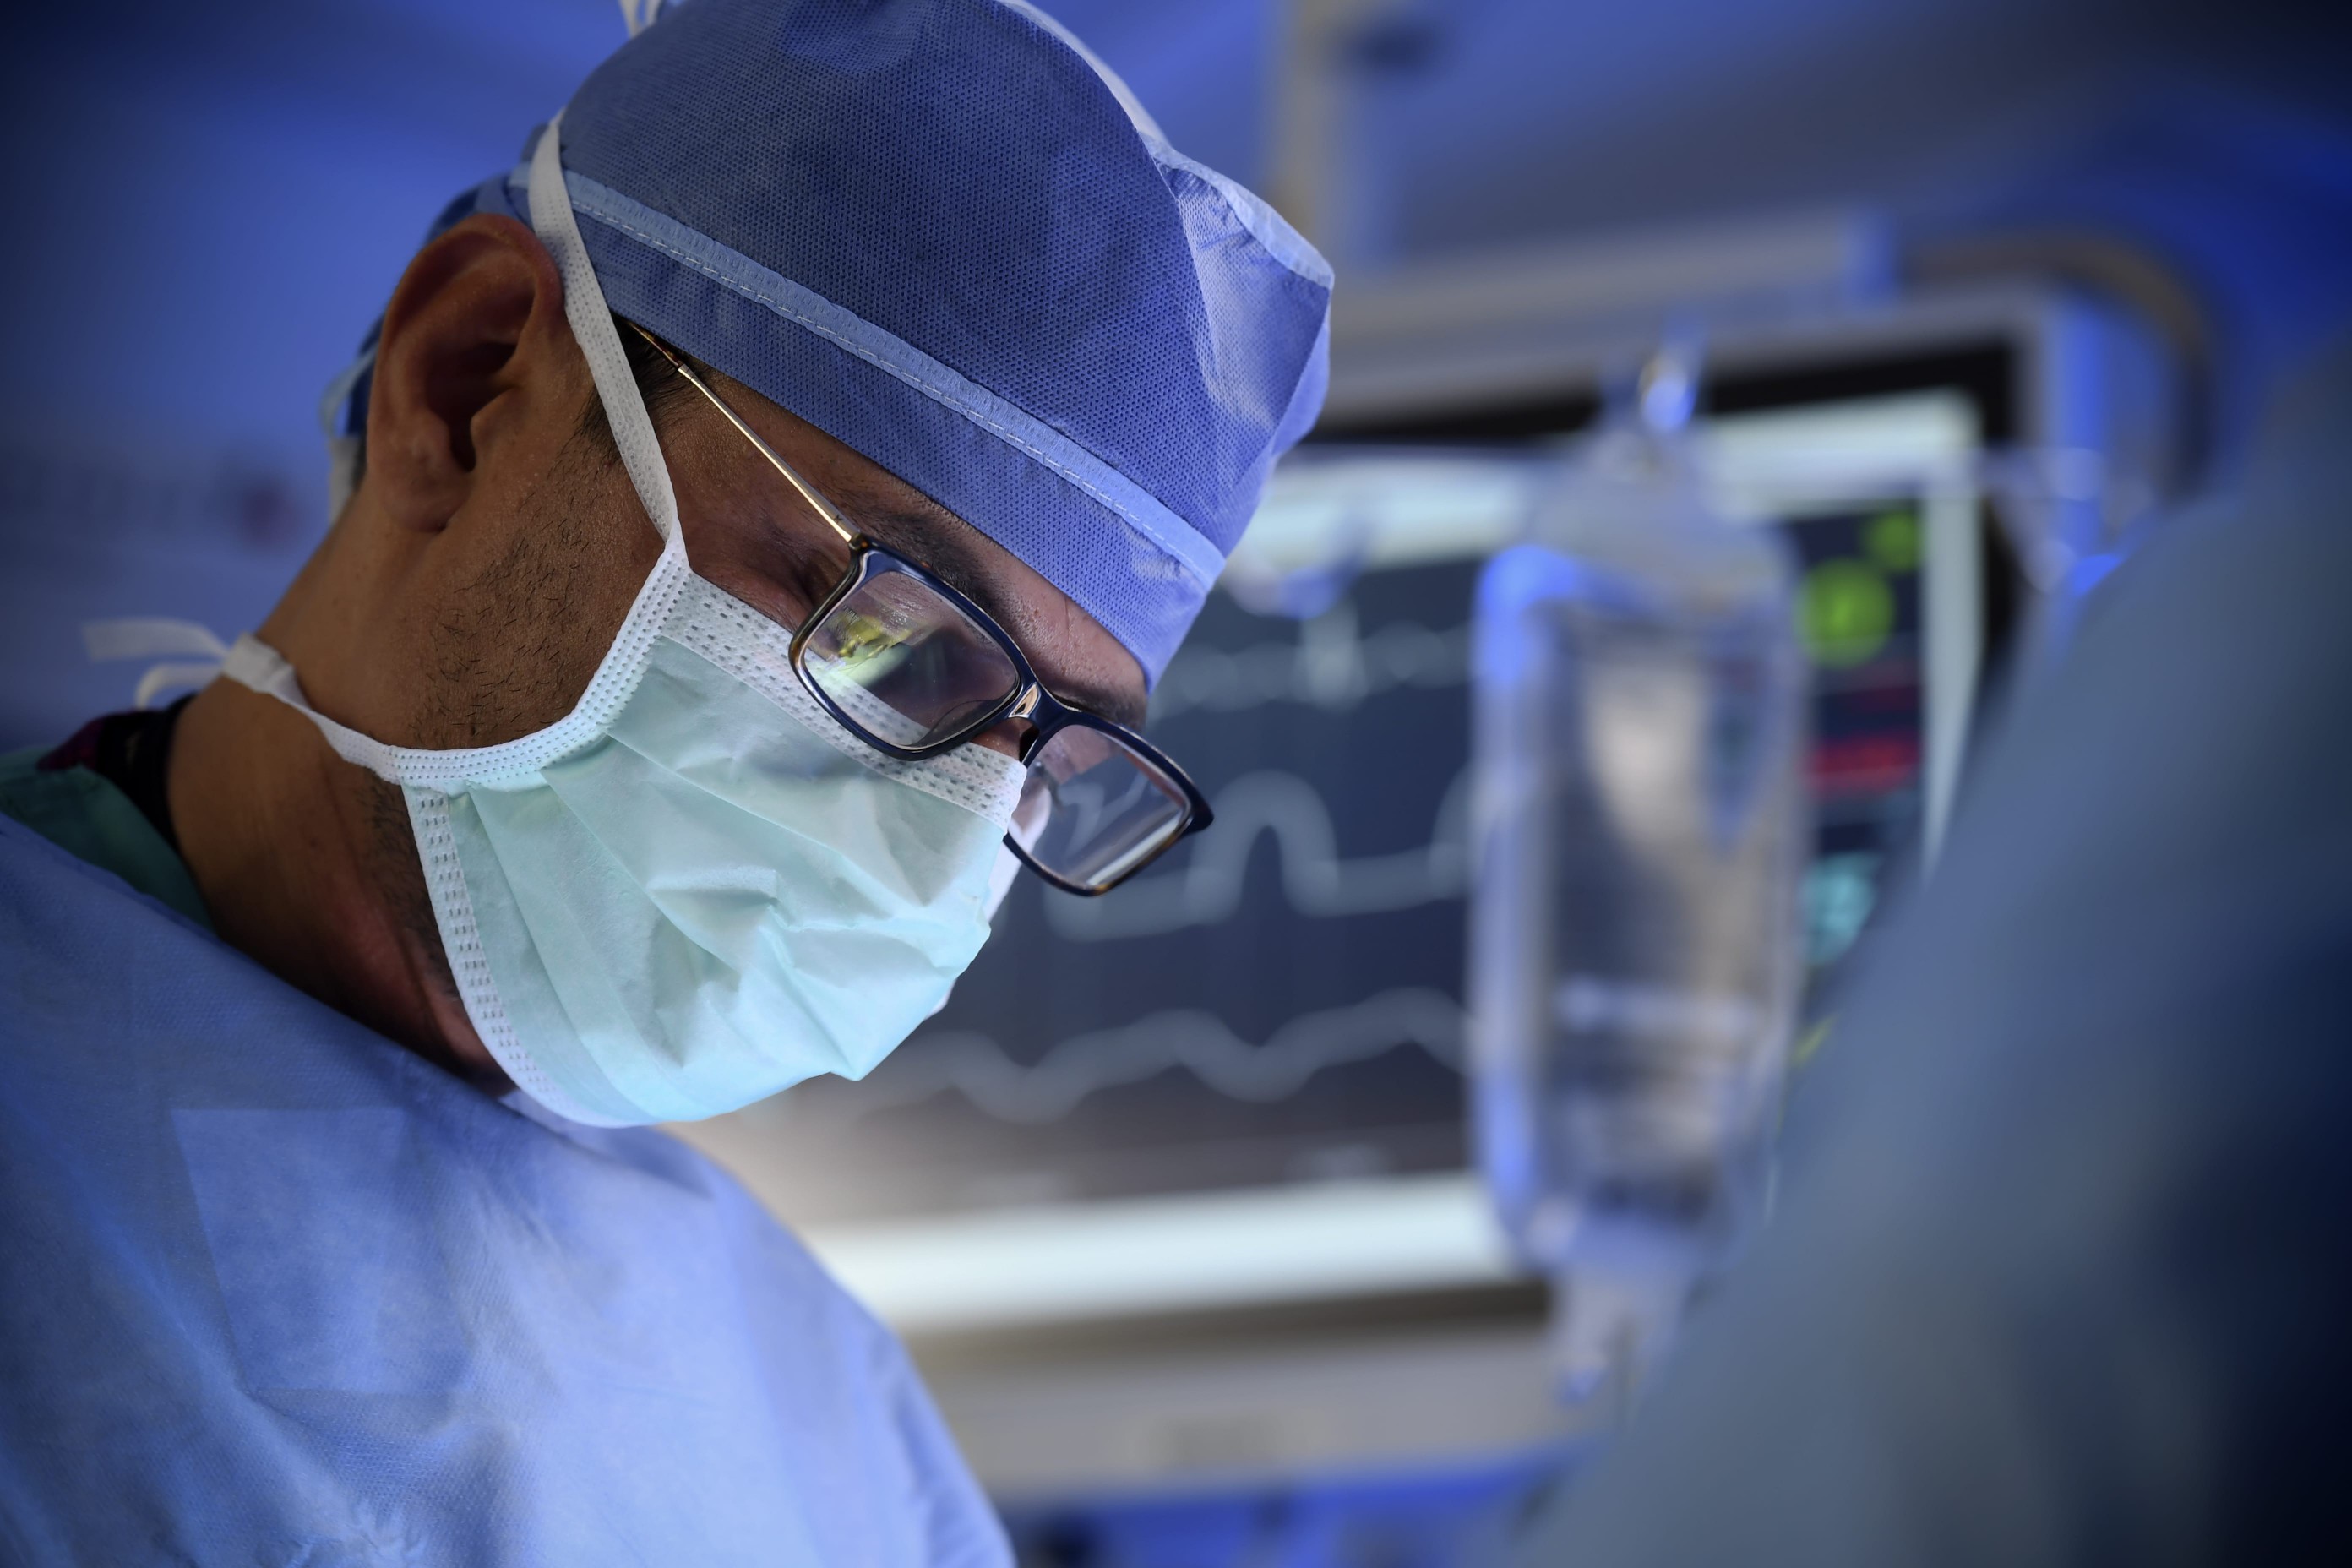 A leading urologic oncologist dressed in surgical attire performs a clinical trial procedure